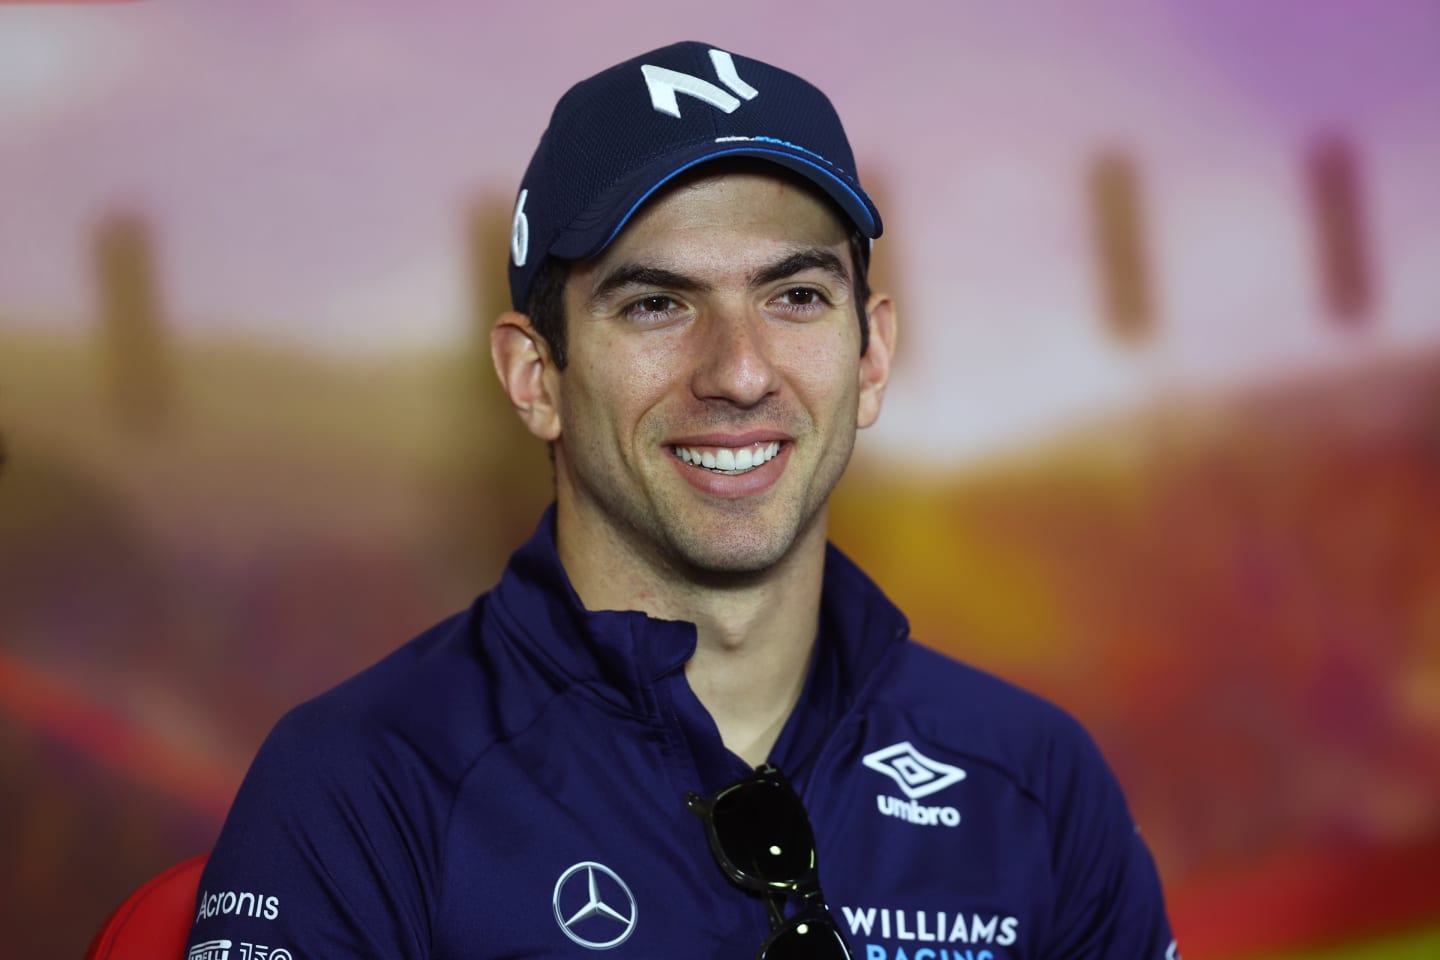 BARCELONA, SPAIN - MAY 20: Nicholas Latifi of Canada and Williams looks on in the Drivers Press Conference prior to practice ahead of the F1 Grand Prix of Spain at Circuit de Barcelona-Catalunya on May 20, 2022 in Barcelona, Spain. (Photo by Lars Baron/Getty Images)